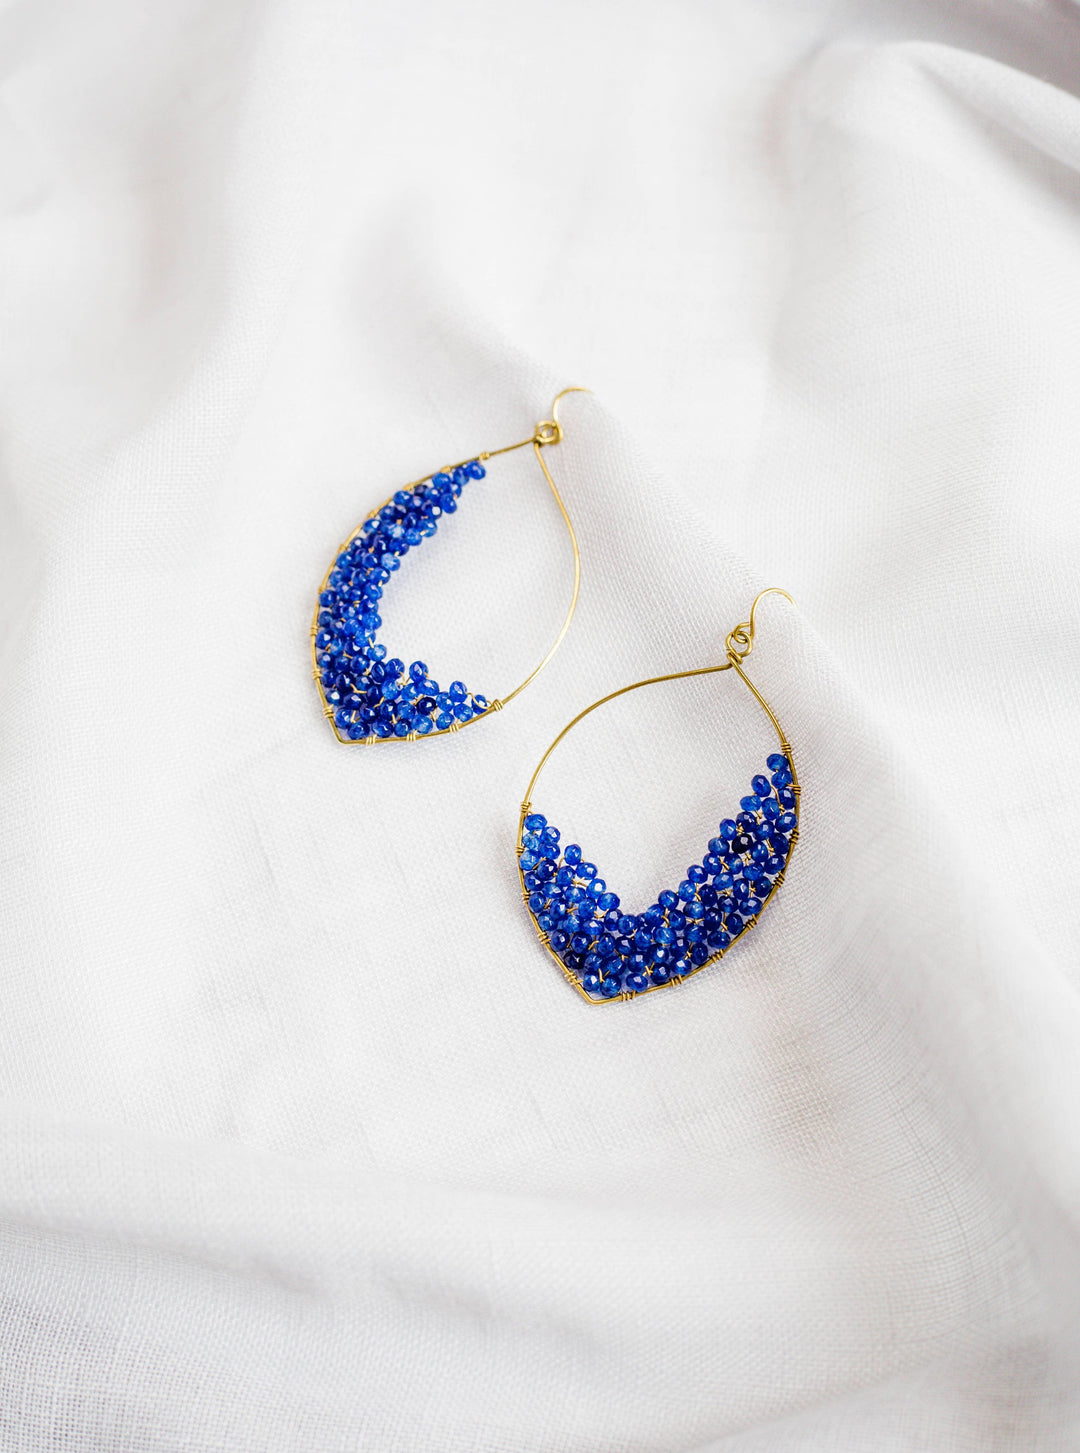 Gold Drop Earrings - Ethical Trade Co